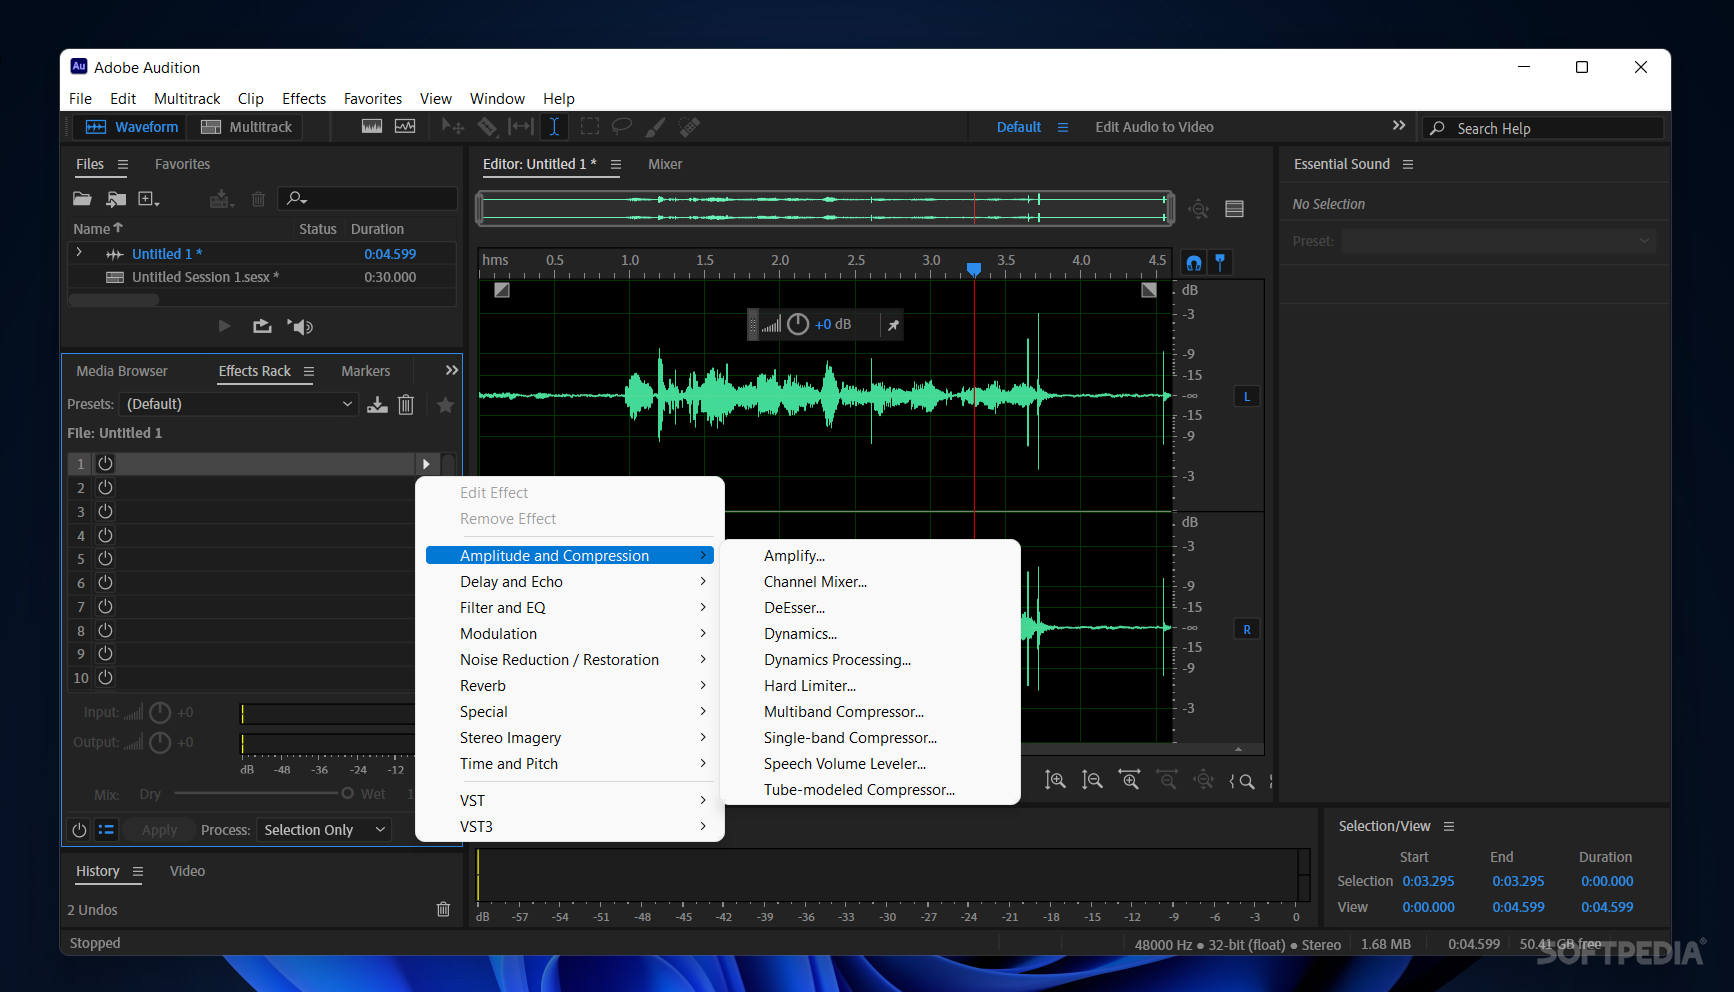 download adobe audition 1.5